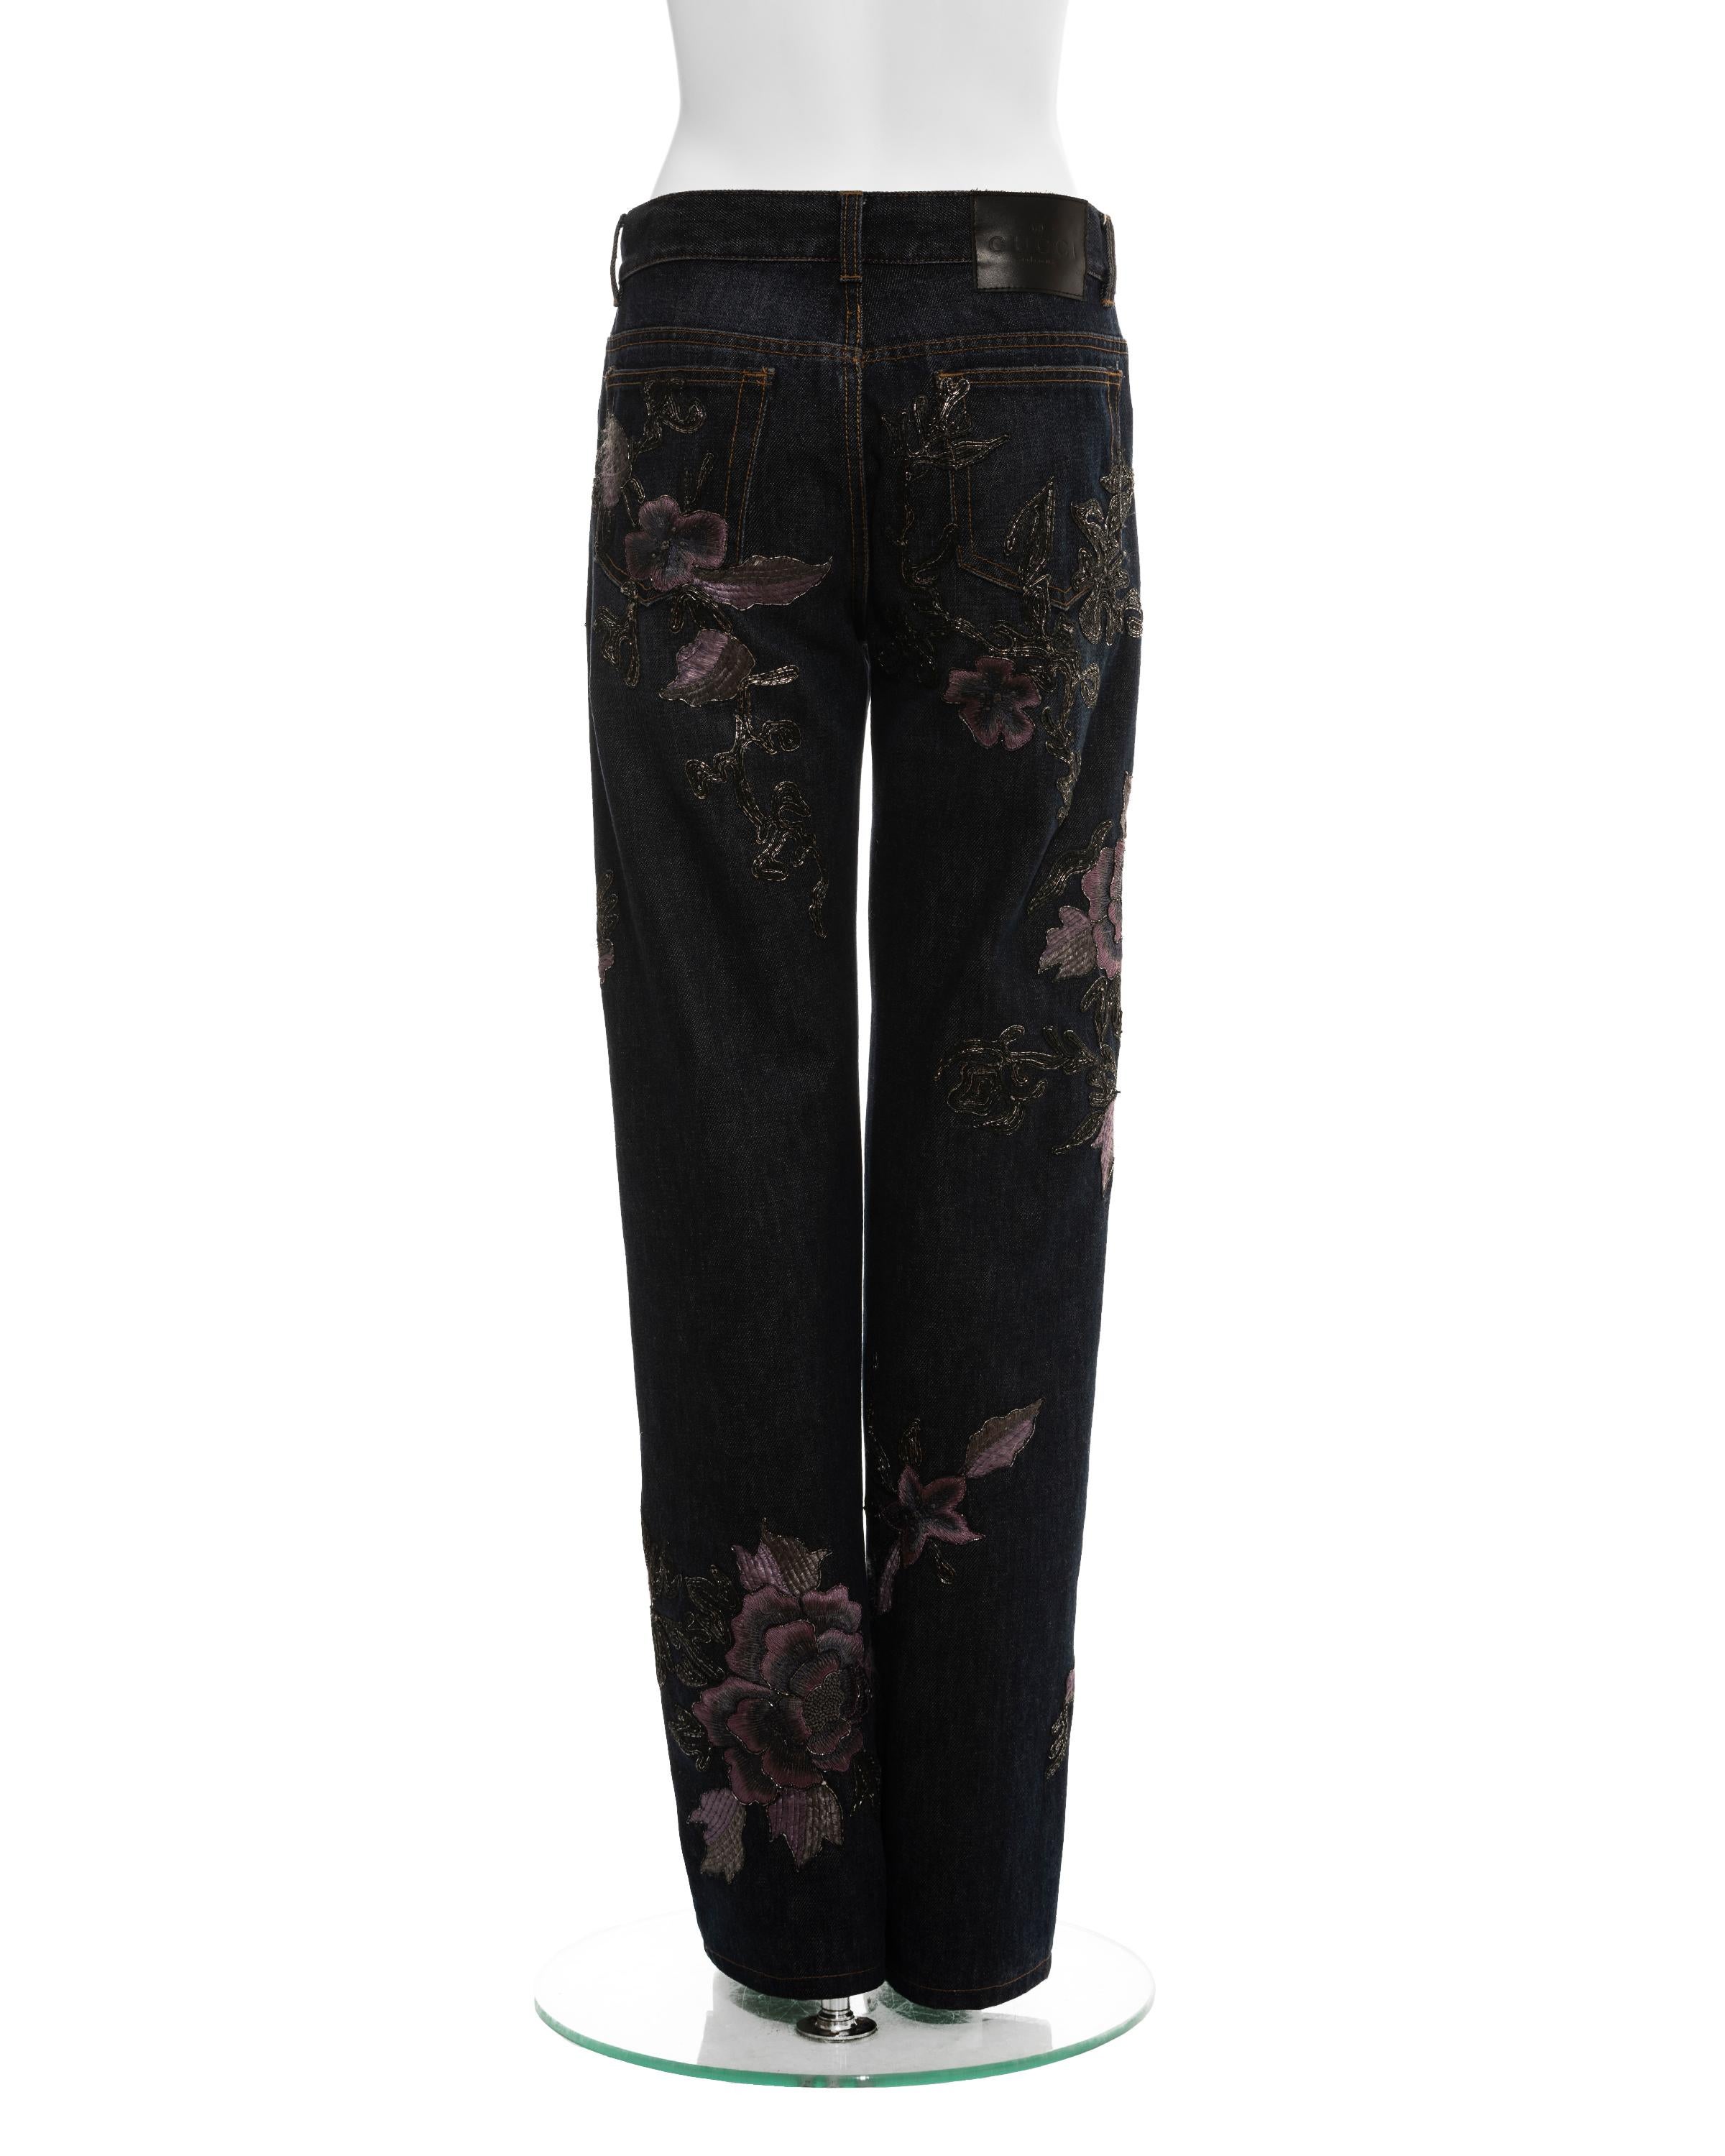 Gucci by Tom Ford denim jeans with floral embroidery, fw 1999 In Good Condition For Sale In London, GB